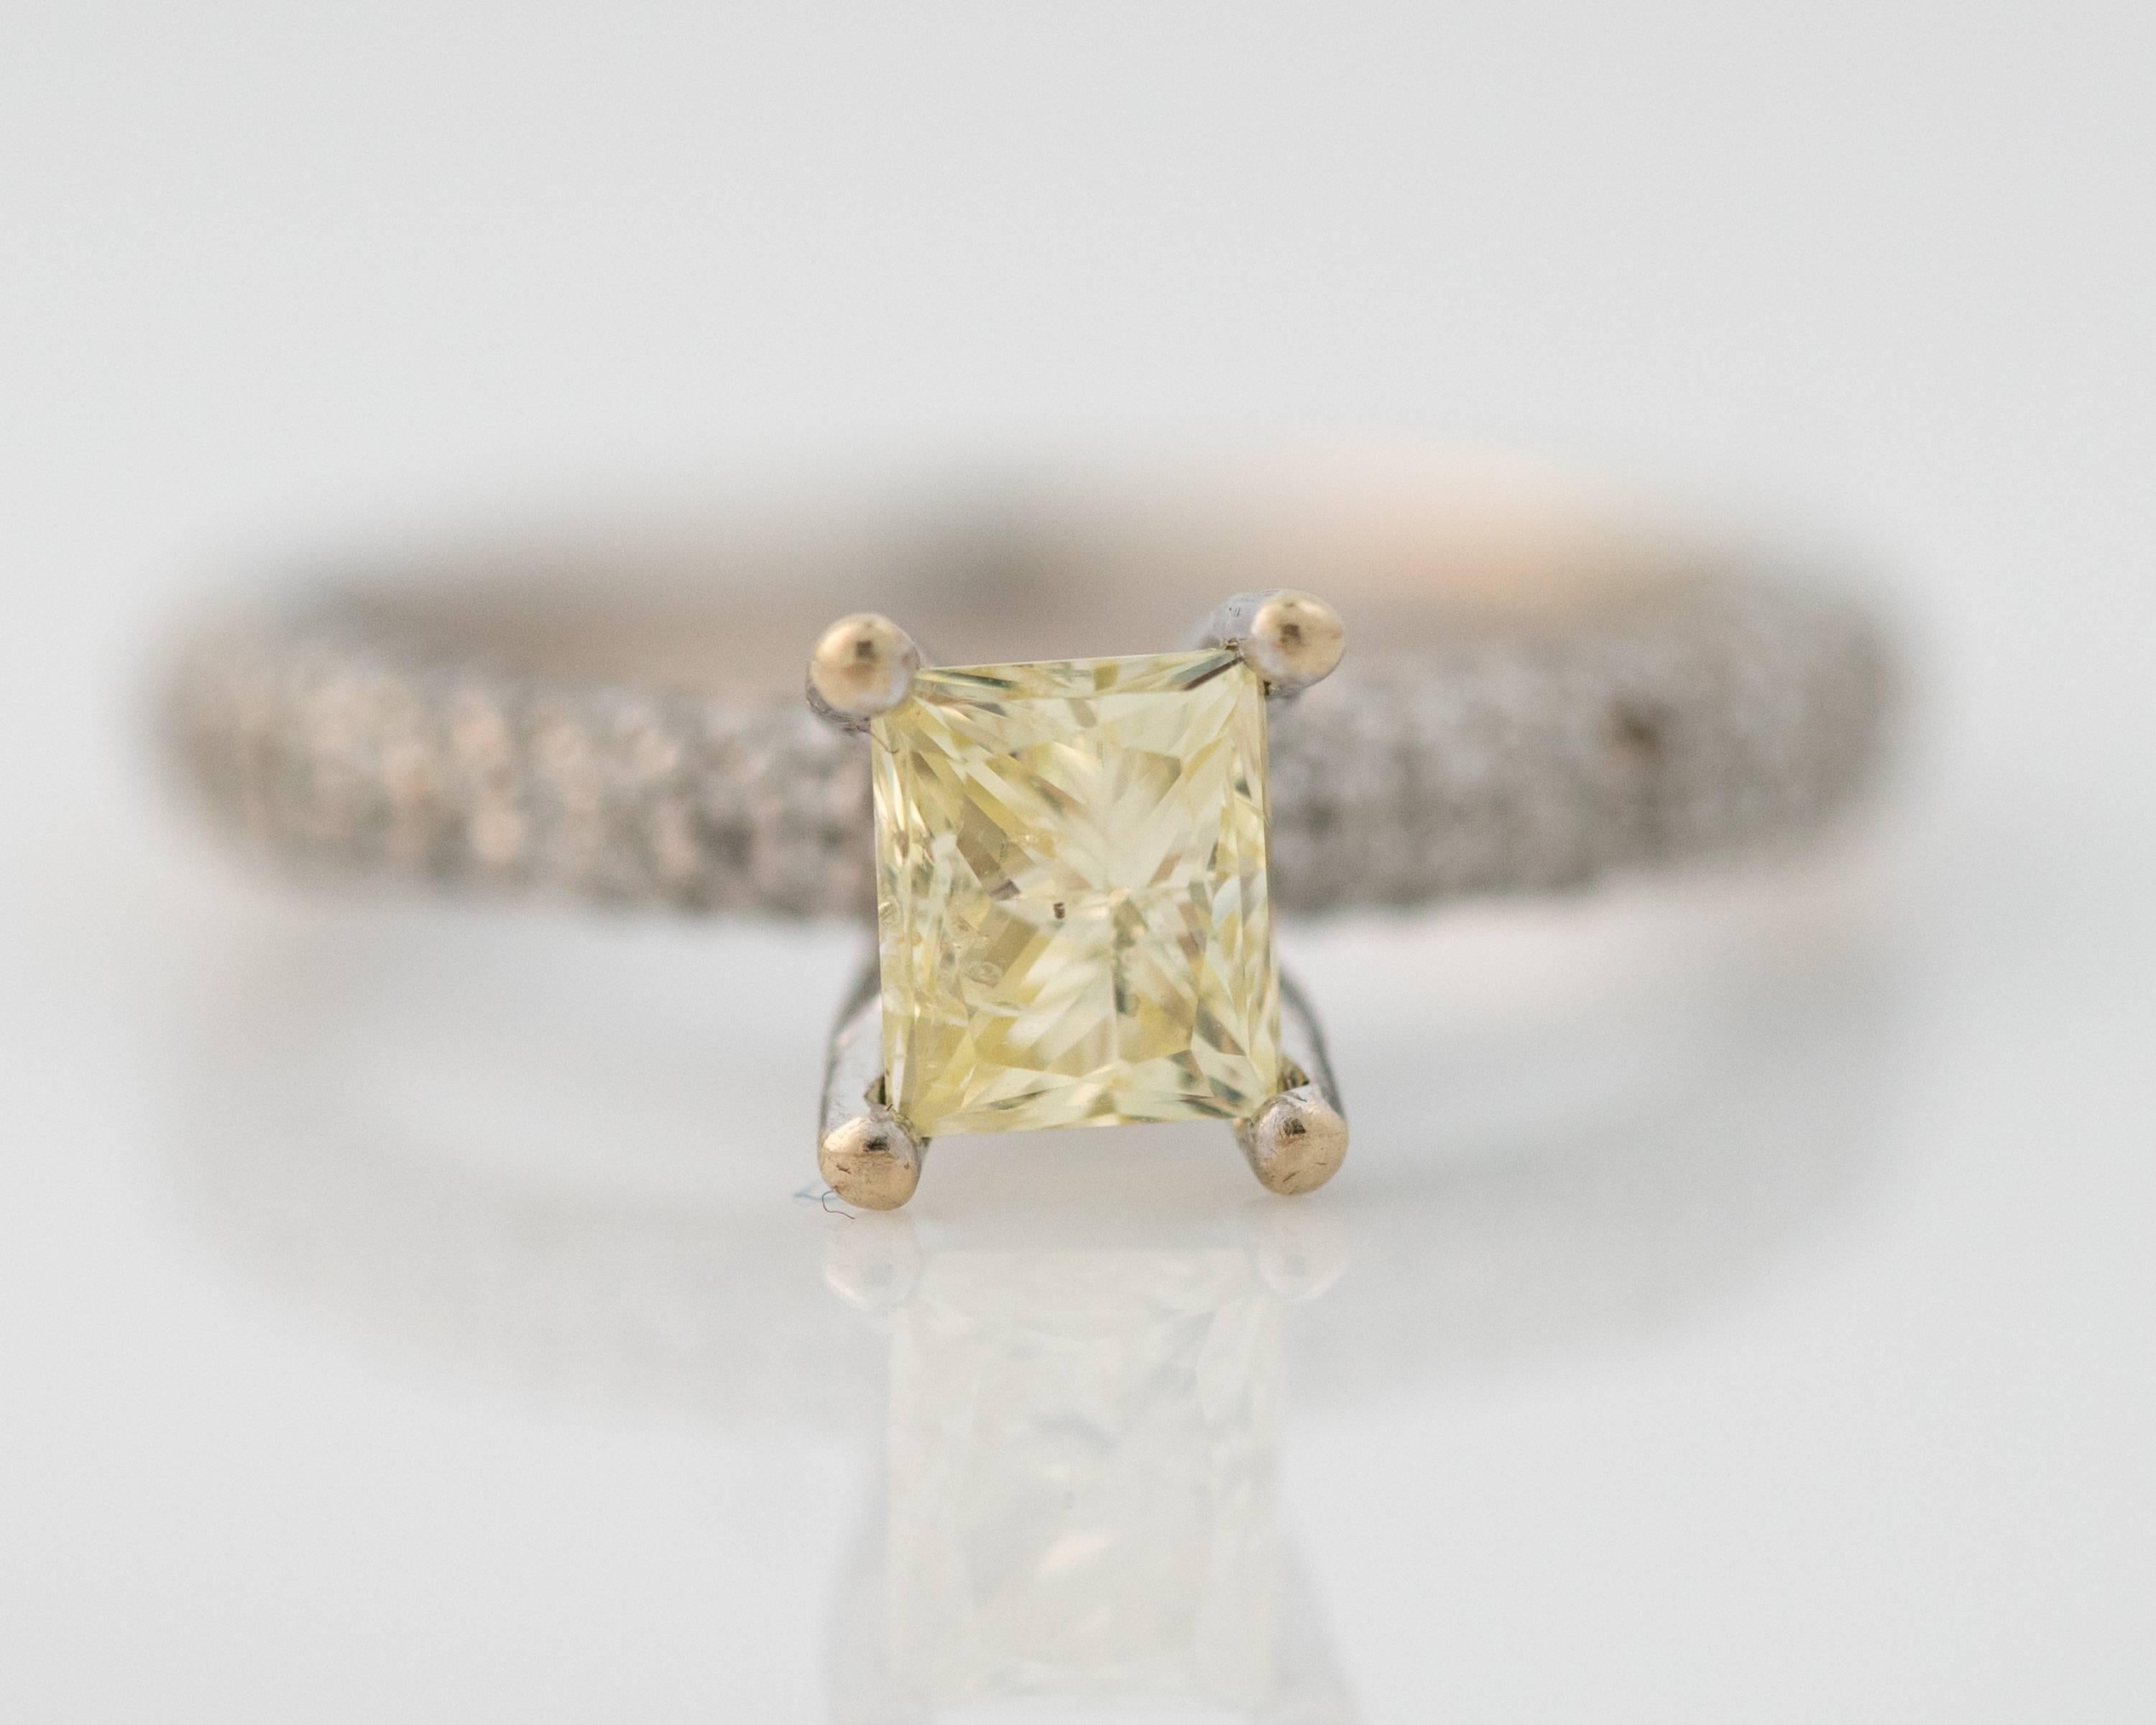 This beautiful Fancy Yellow Diamond Solitaire Engagement Ring is sure to please! Featuring a 1 carat Fancy Yellow center Diamond flanked by .25 carats total weight of round brilliant diamonds set in 14 karat white gold, this stunning ring will fit a